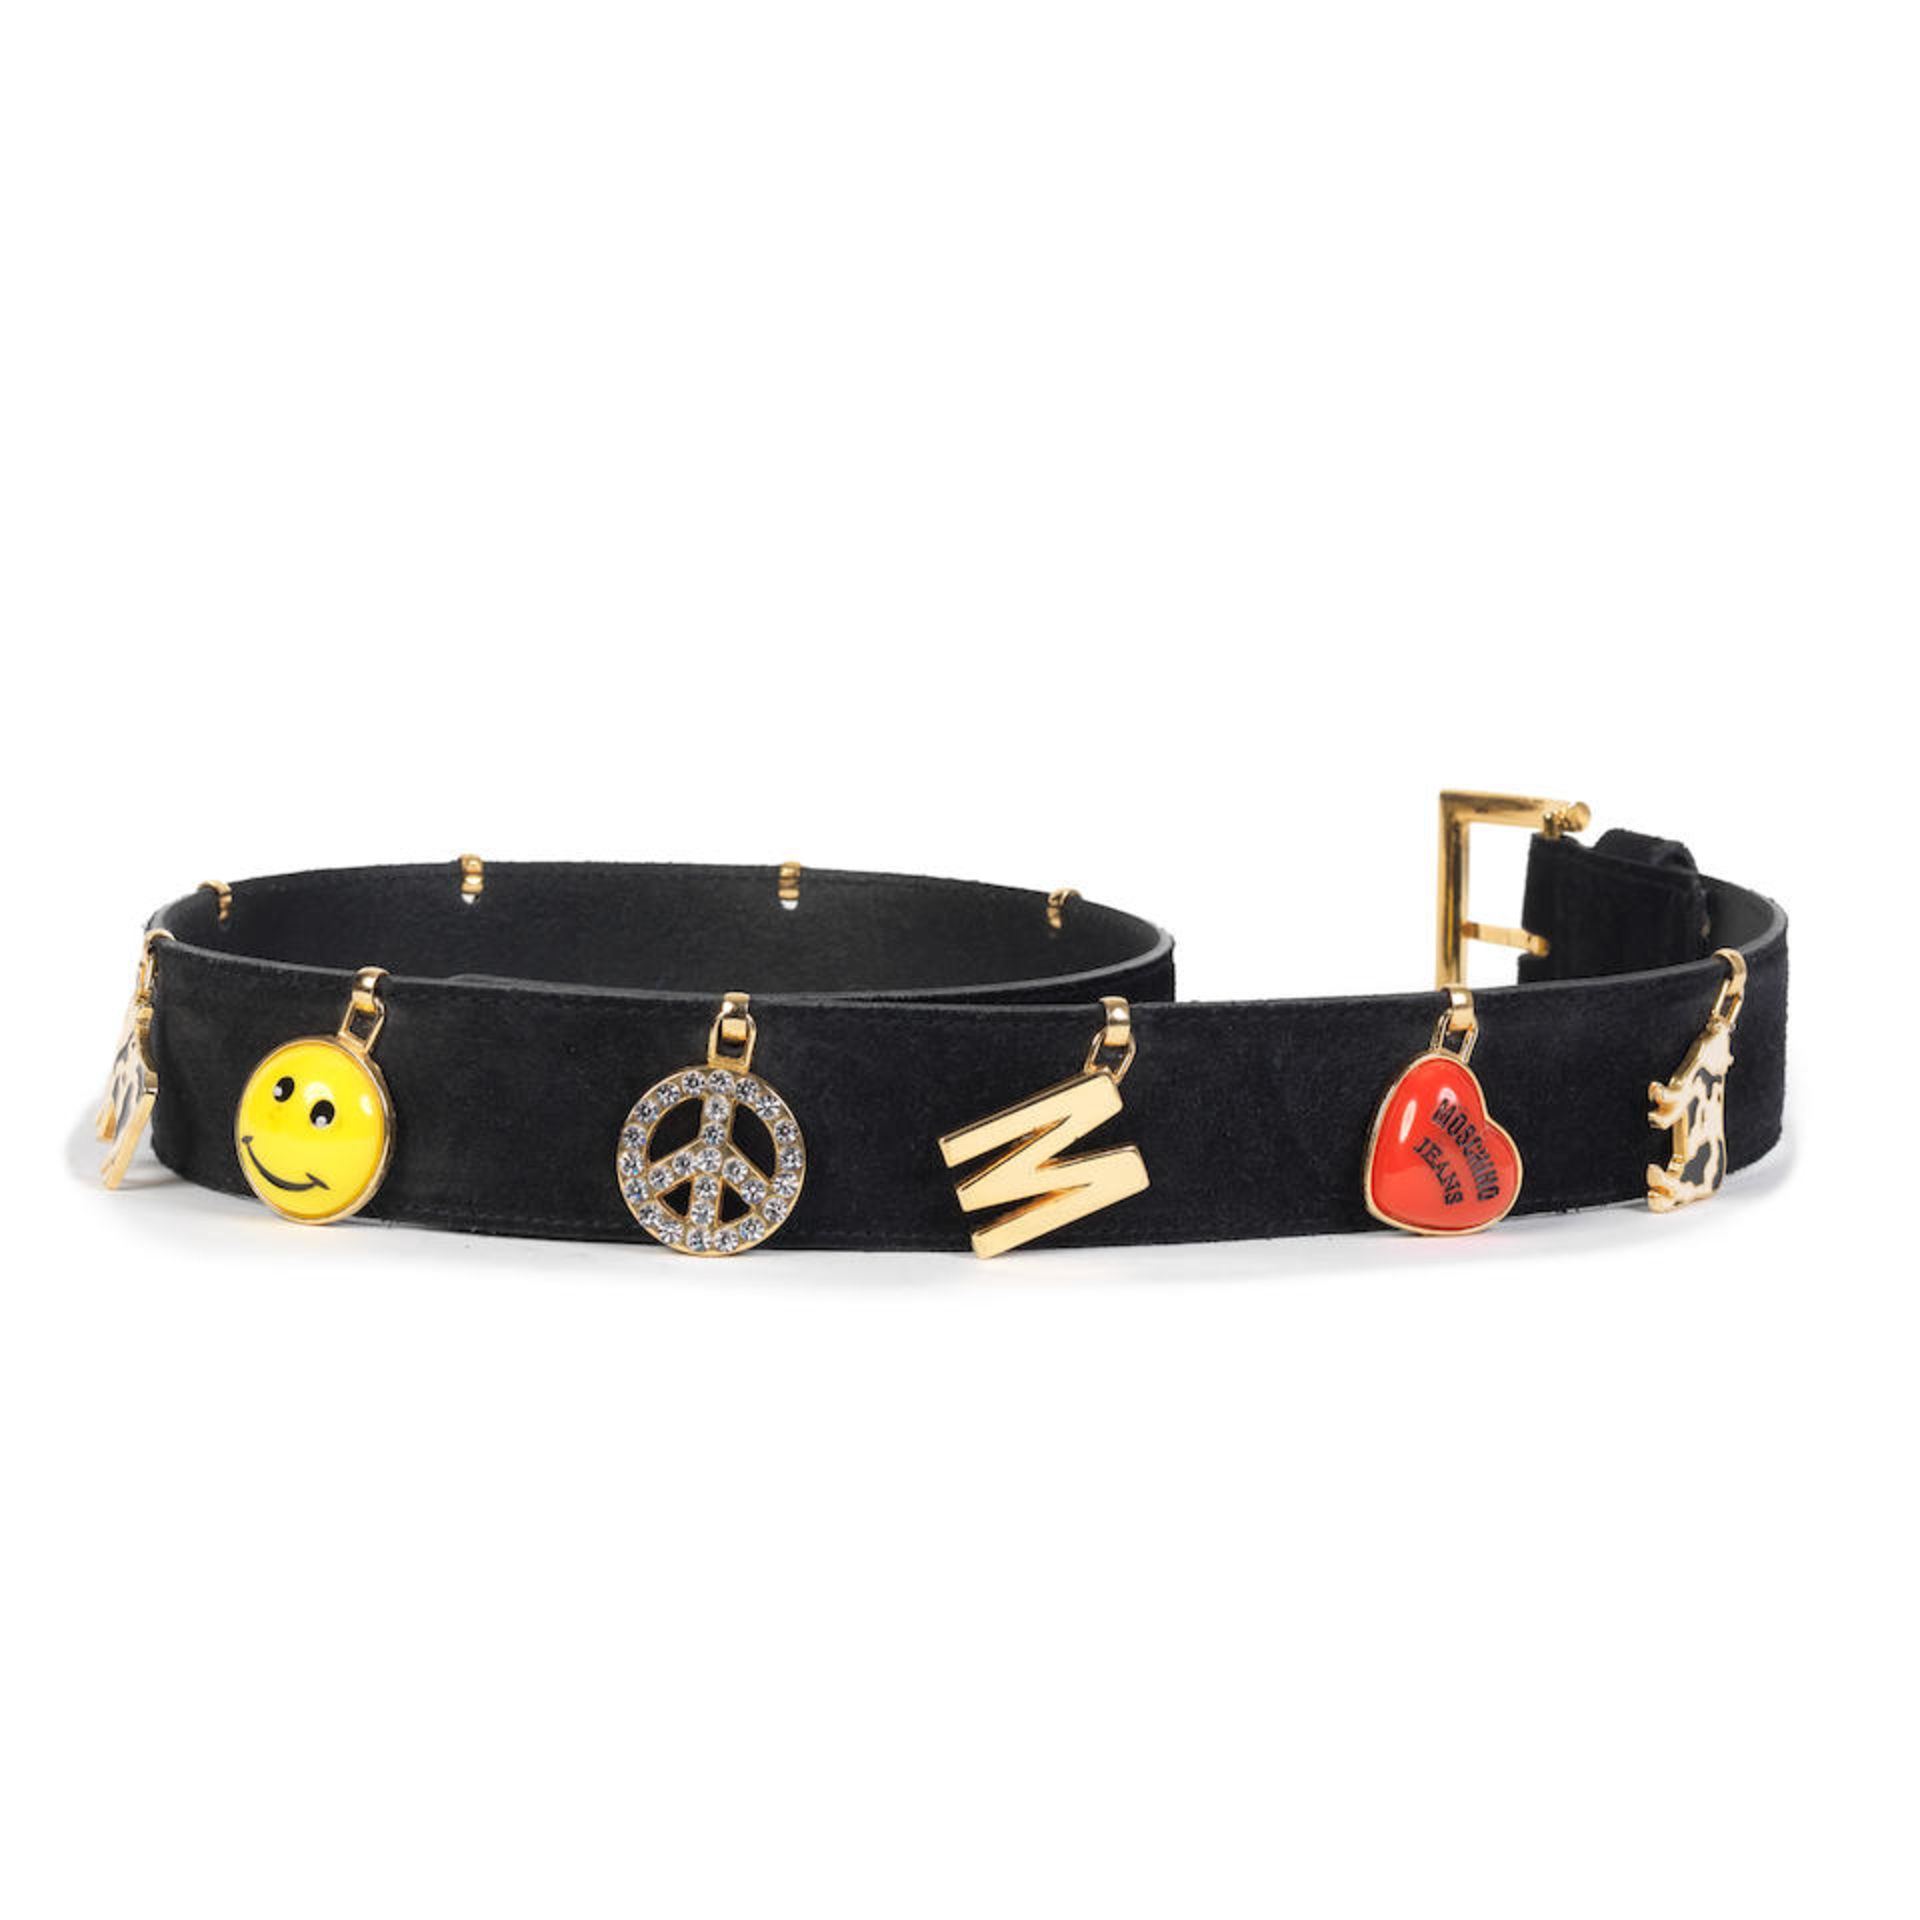 Moschino: Two Belts 1990s (Includes one box) - Image 2 of 3